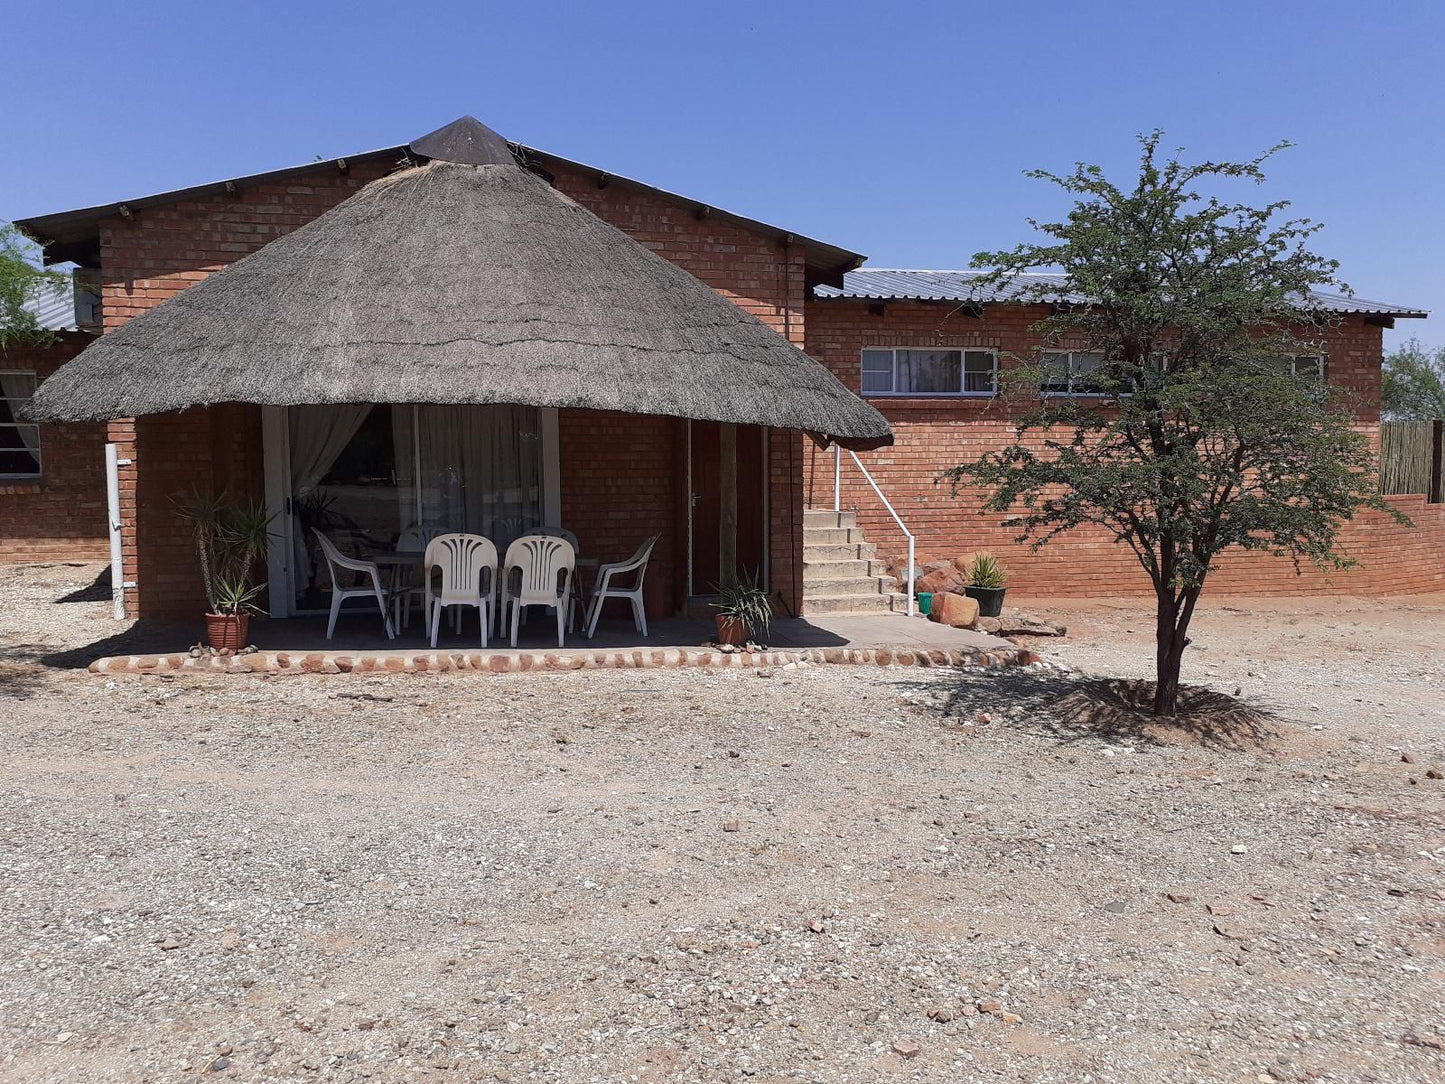 Marrick Safari Kimberley Northern Cape South Africa House, Building, Architecture